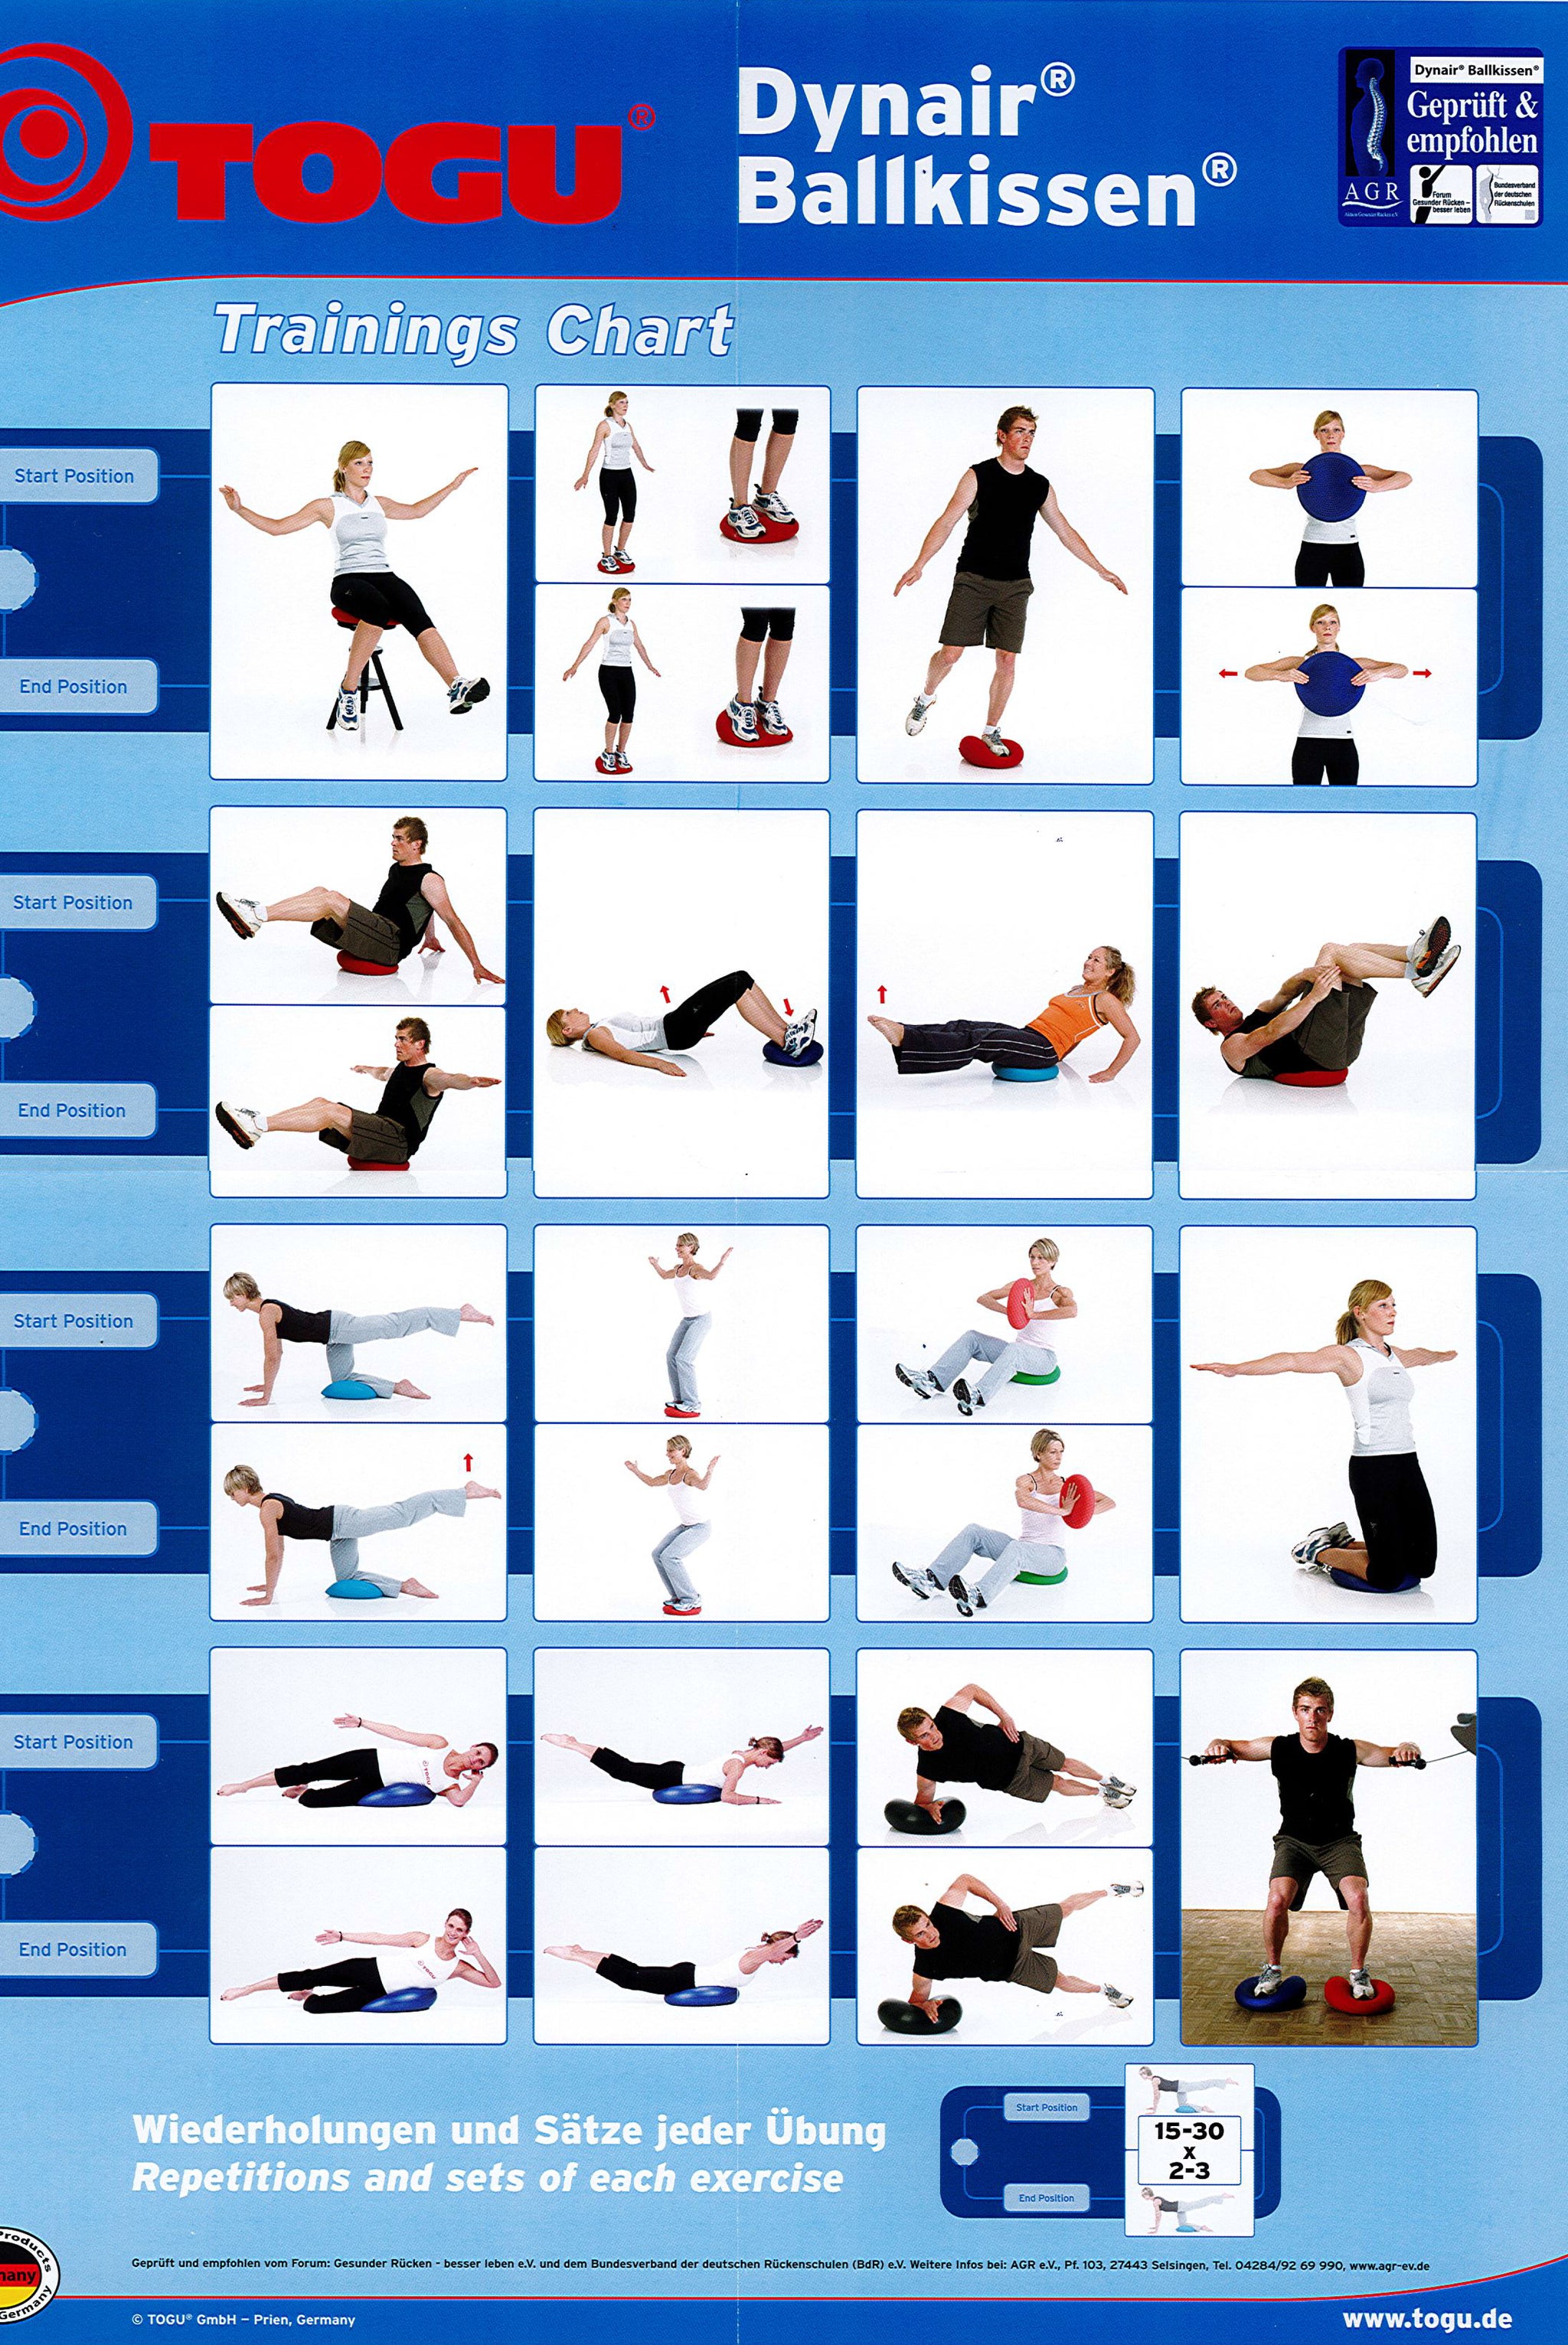 Exercise guide